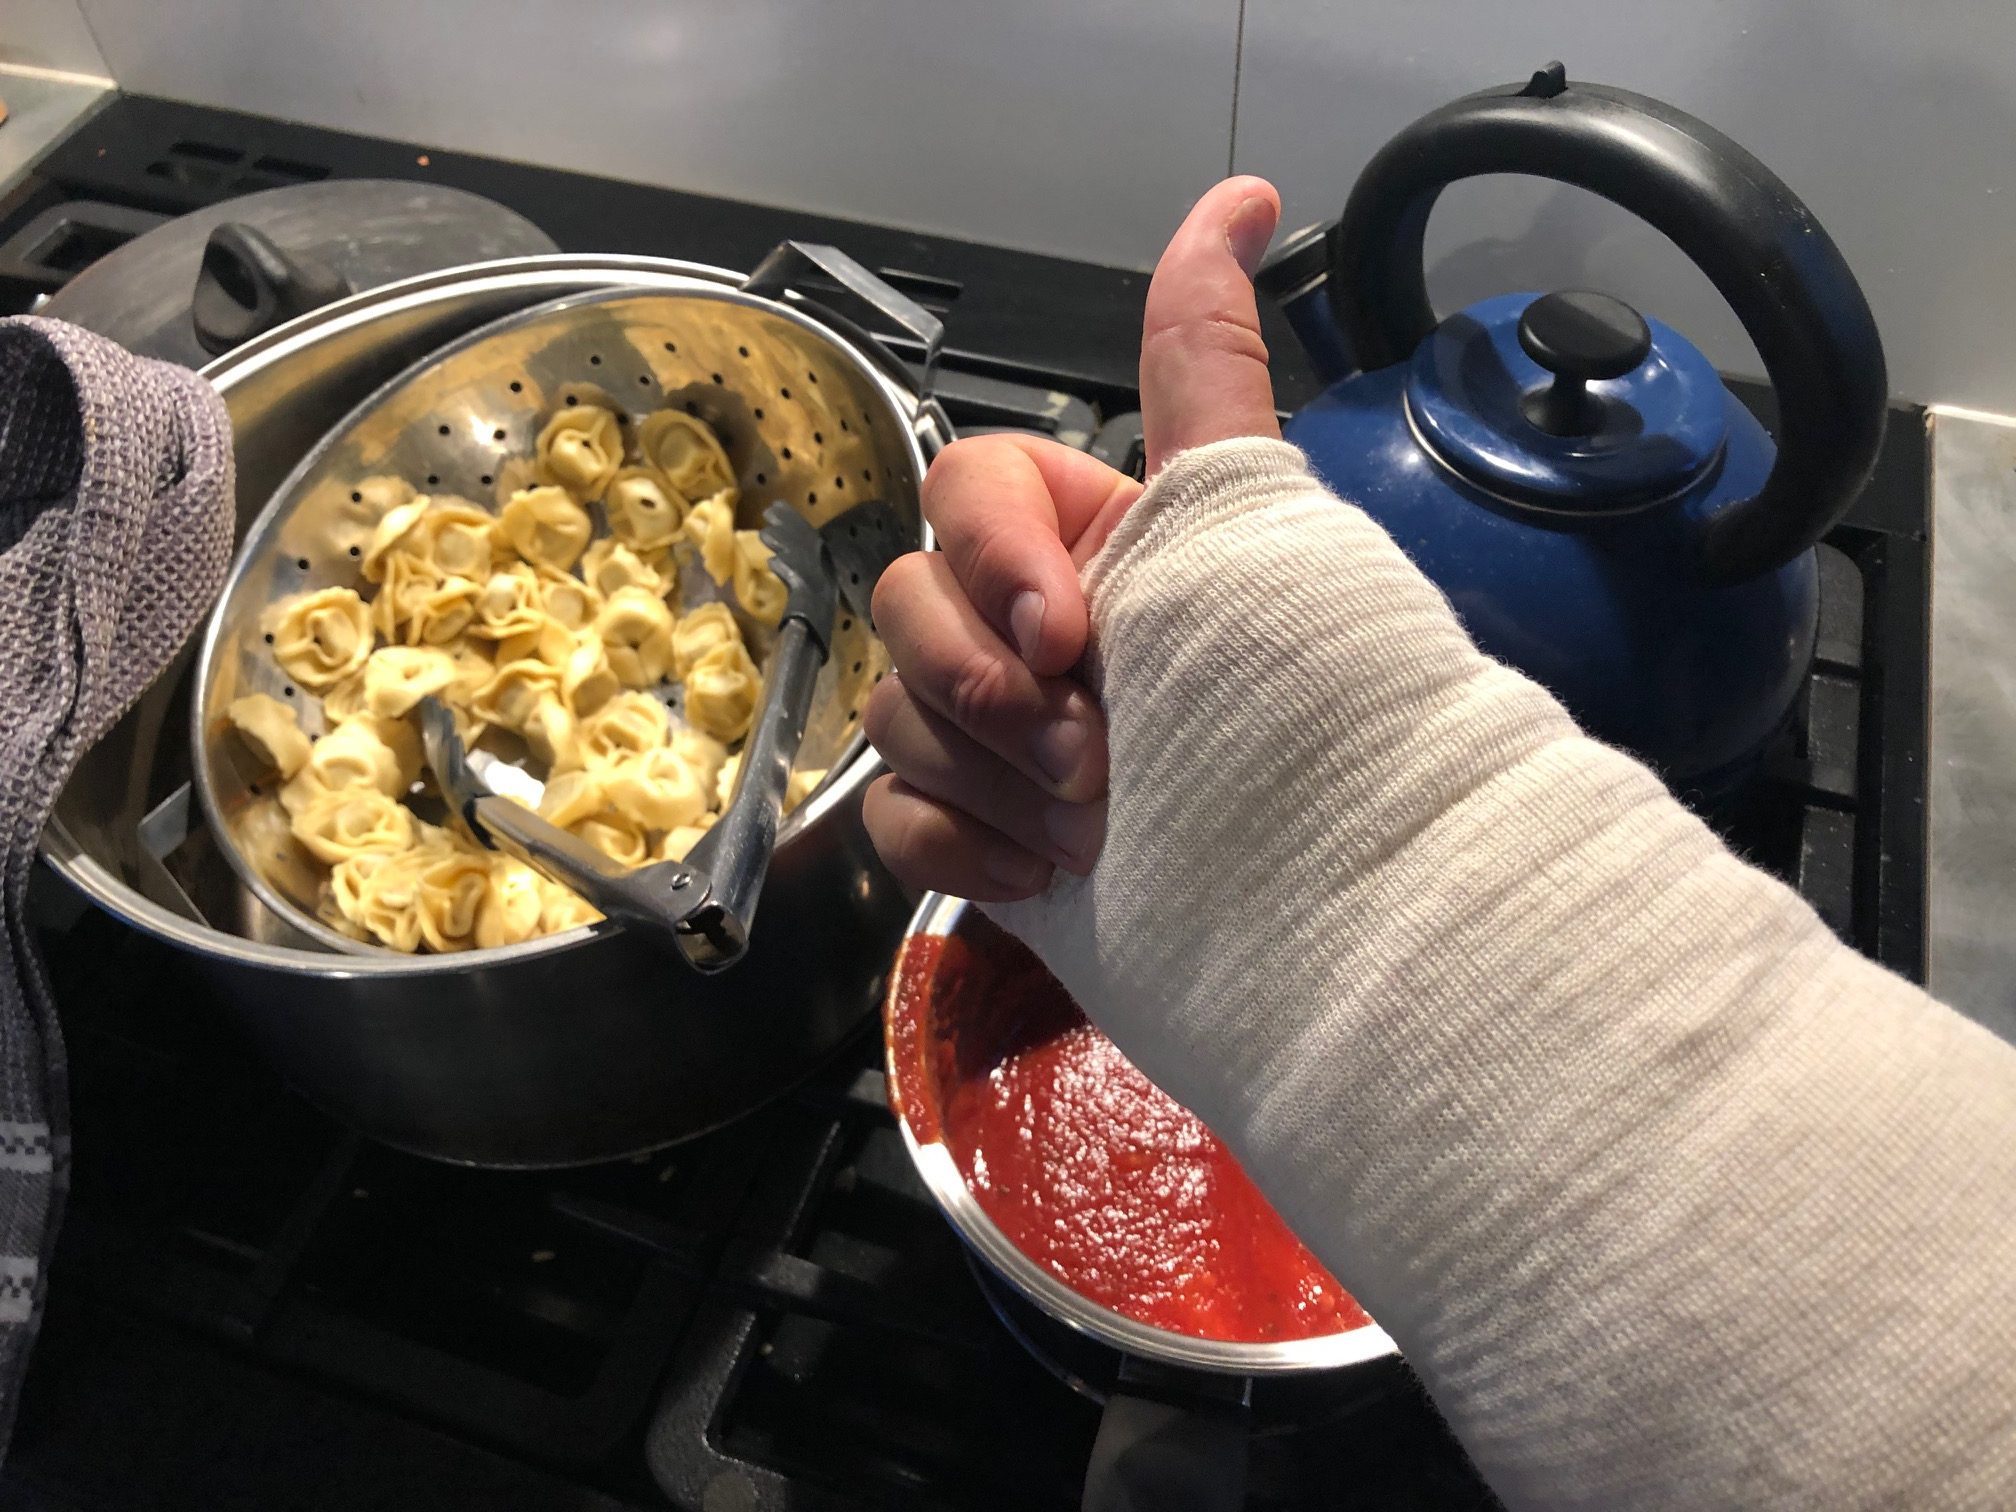 Gratitude for oven mitts and public health